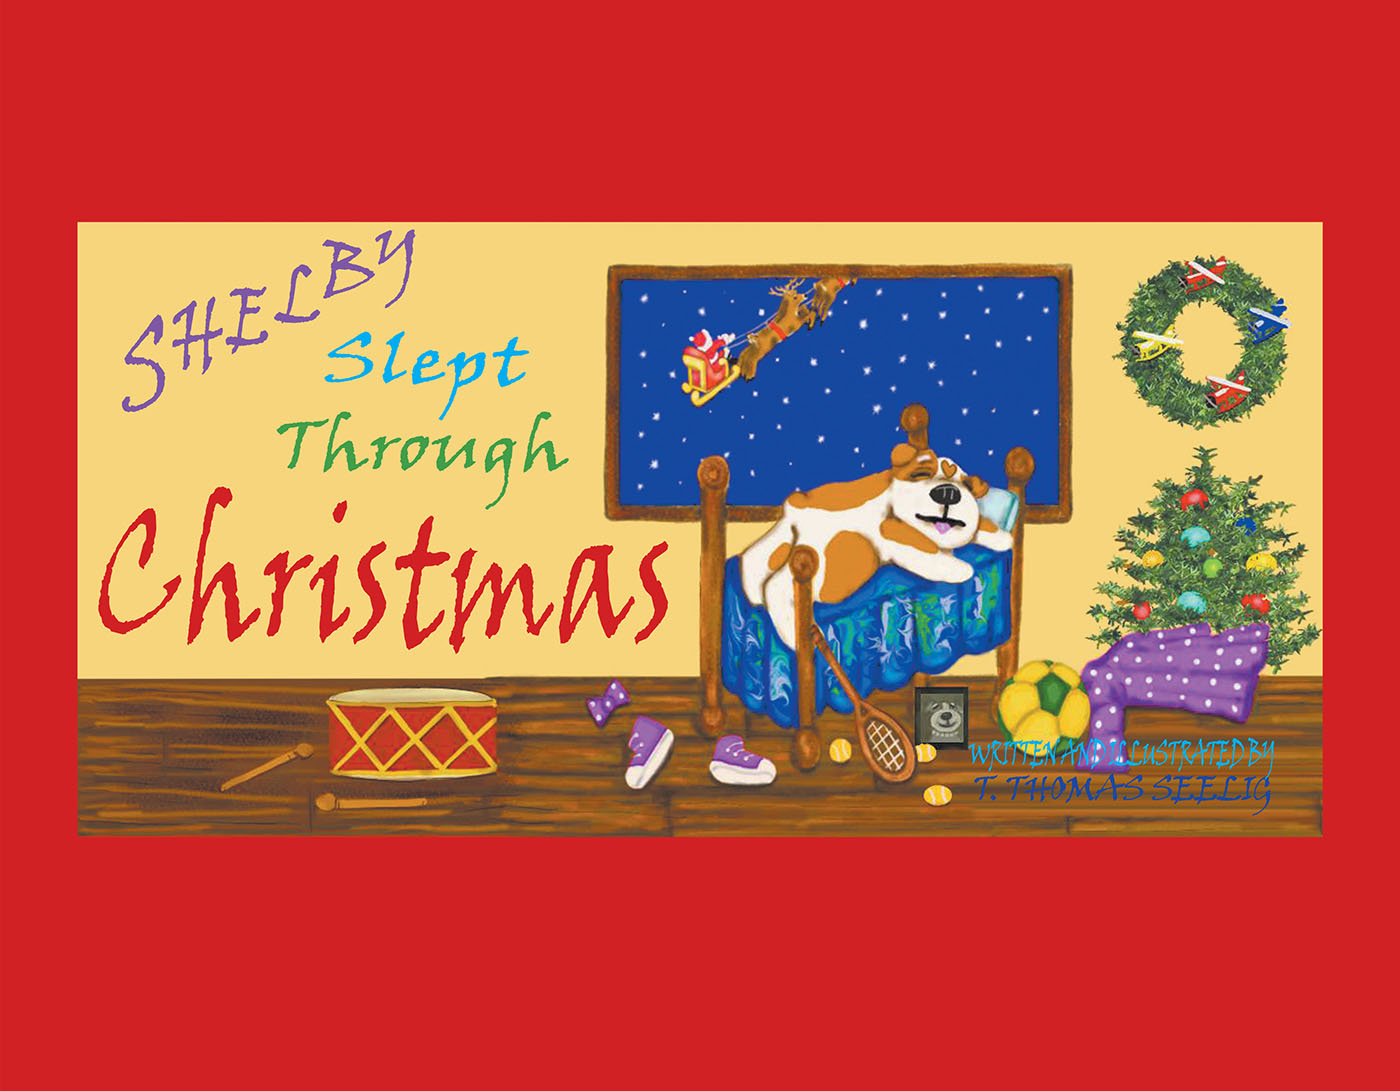 Shelby Slept Through Christmas Cover Image